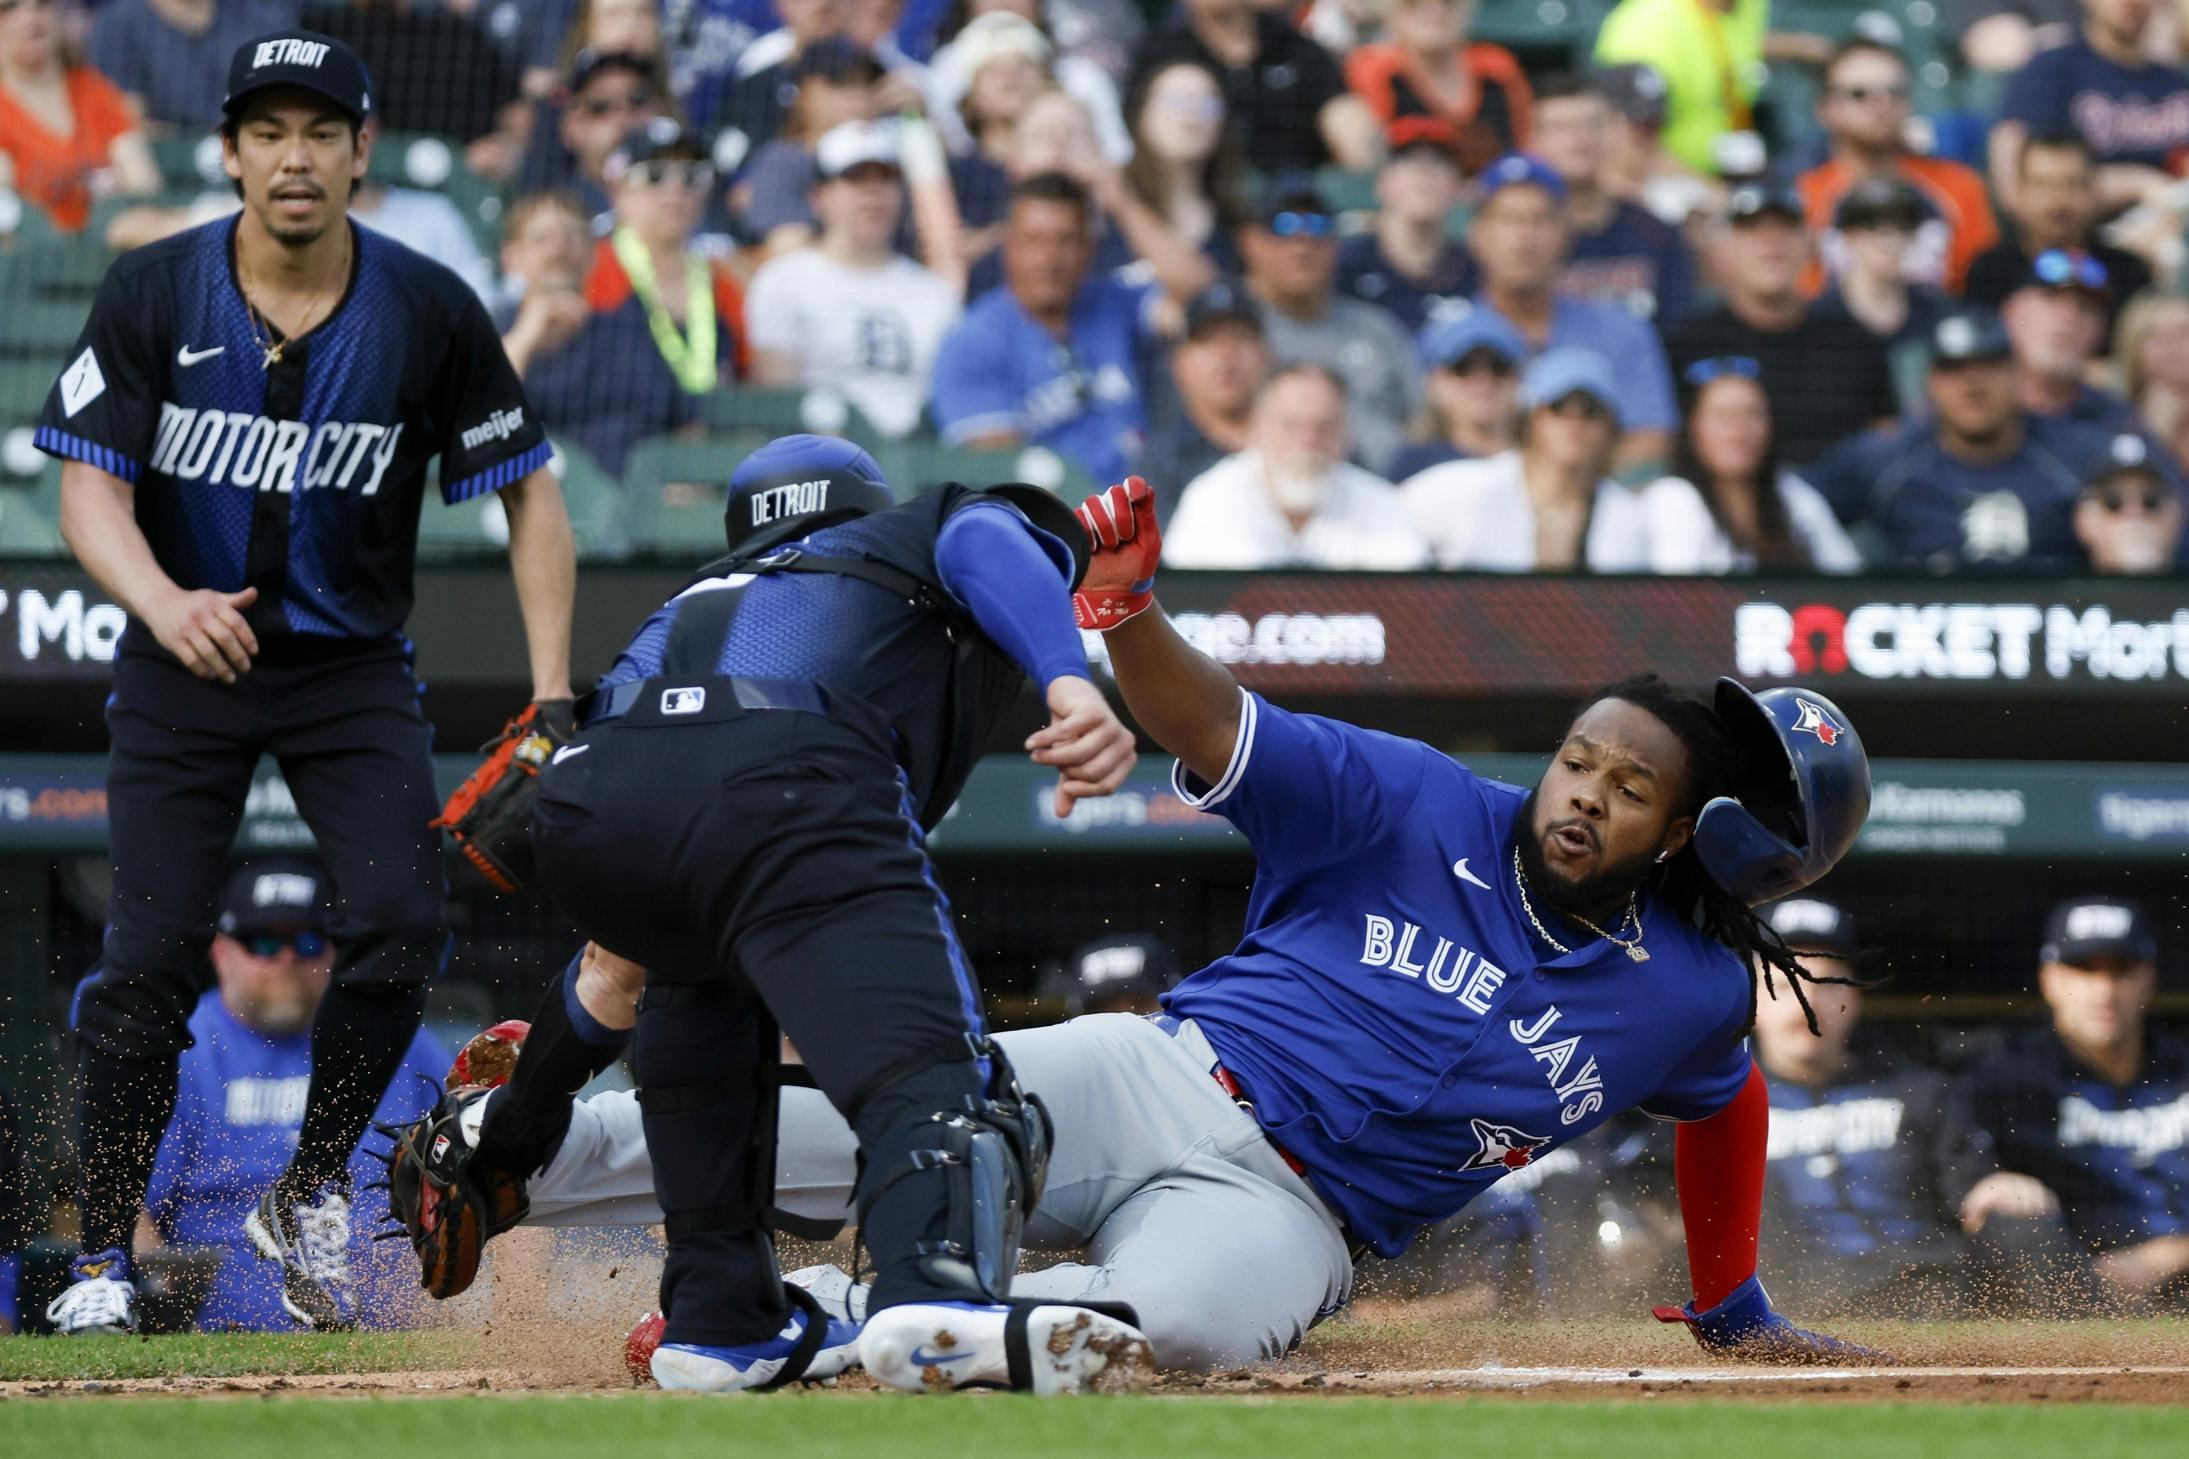 Toronto Blue Jays first baseman Vladimir Guerrero Jr. (27) slides into home plate and is tagged out by Detroit Tigers catcher Carson Kelly (15) in the first inning against the Detroit Tigers at Comerica Park.